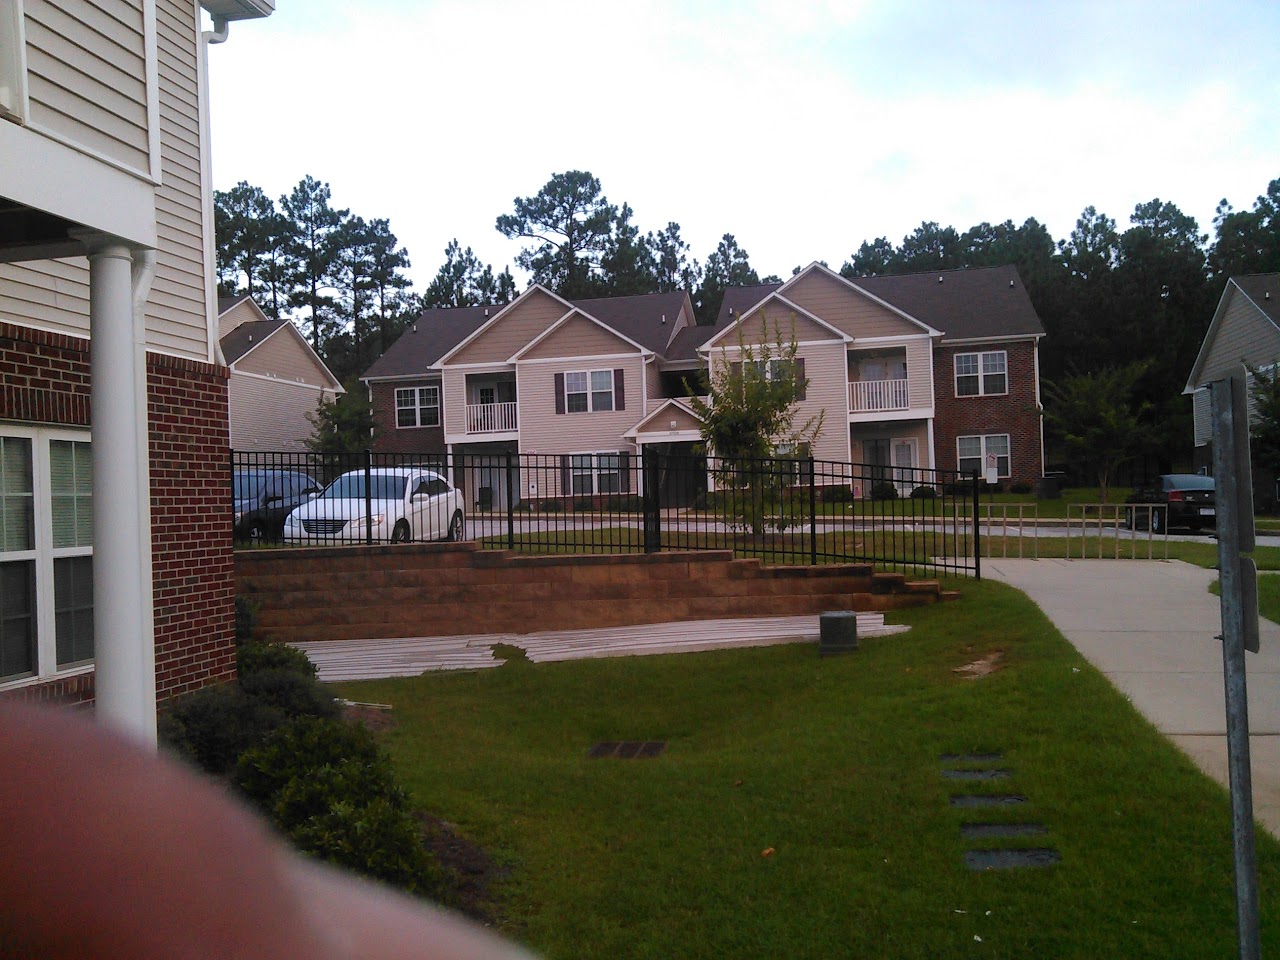 Photo of MAPLE RIDGE. Affordable housing located at 4810 CANYON CREST CIR FAYETTEVILLE, NC 28314